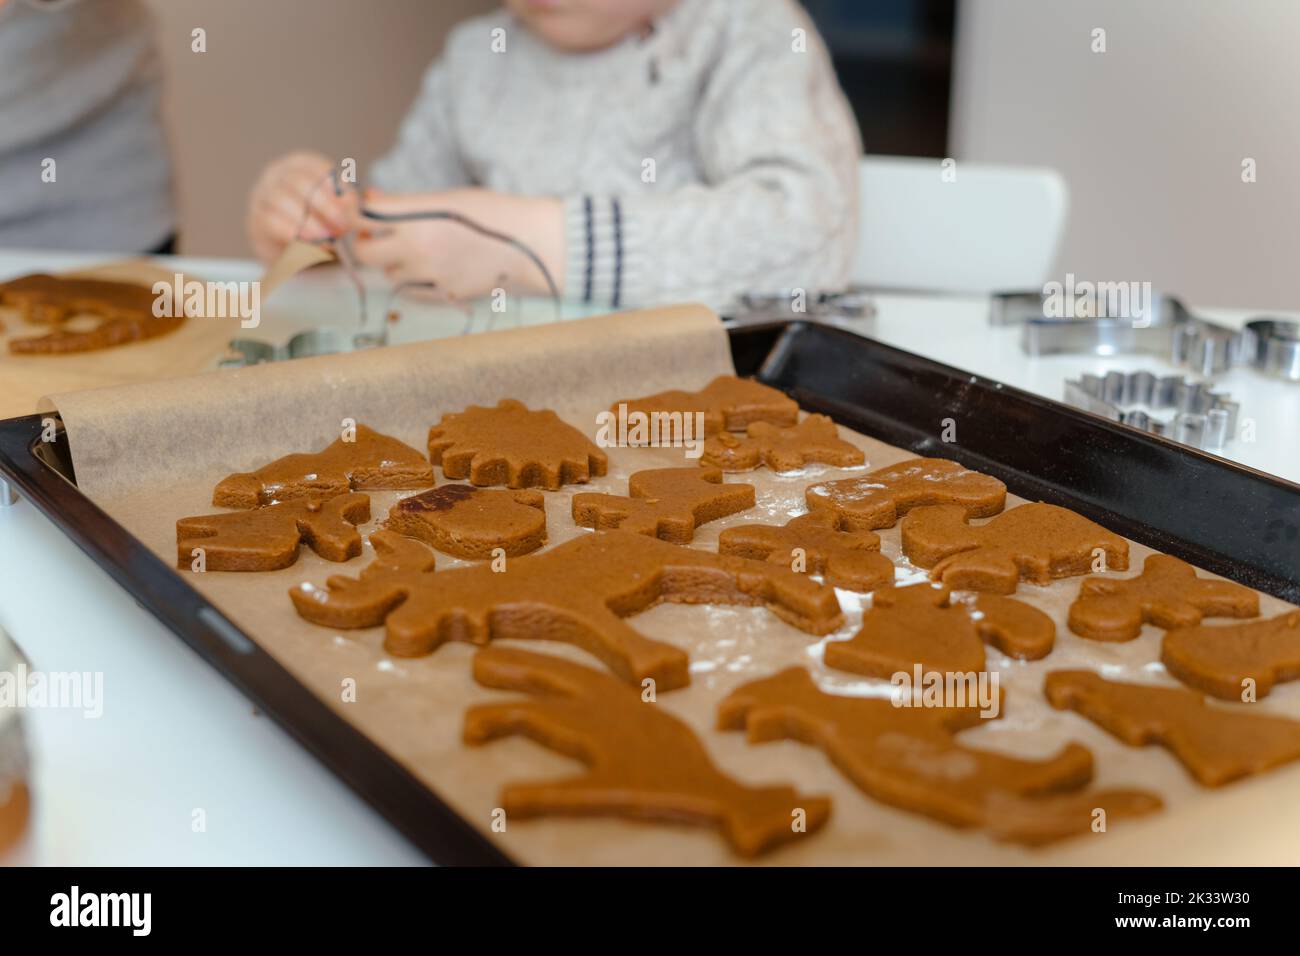 In the foreground are baking trays with Christmas gingerbread in the shape of animals, in the background are the hands of a child Stock Photo